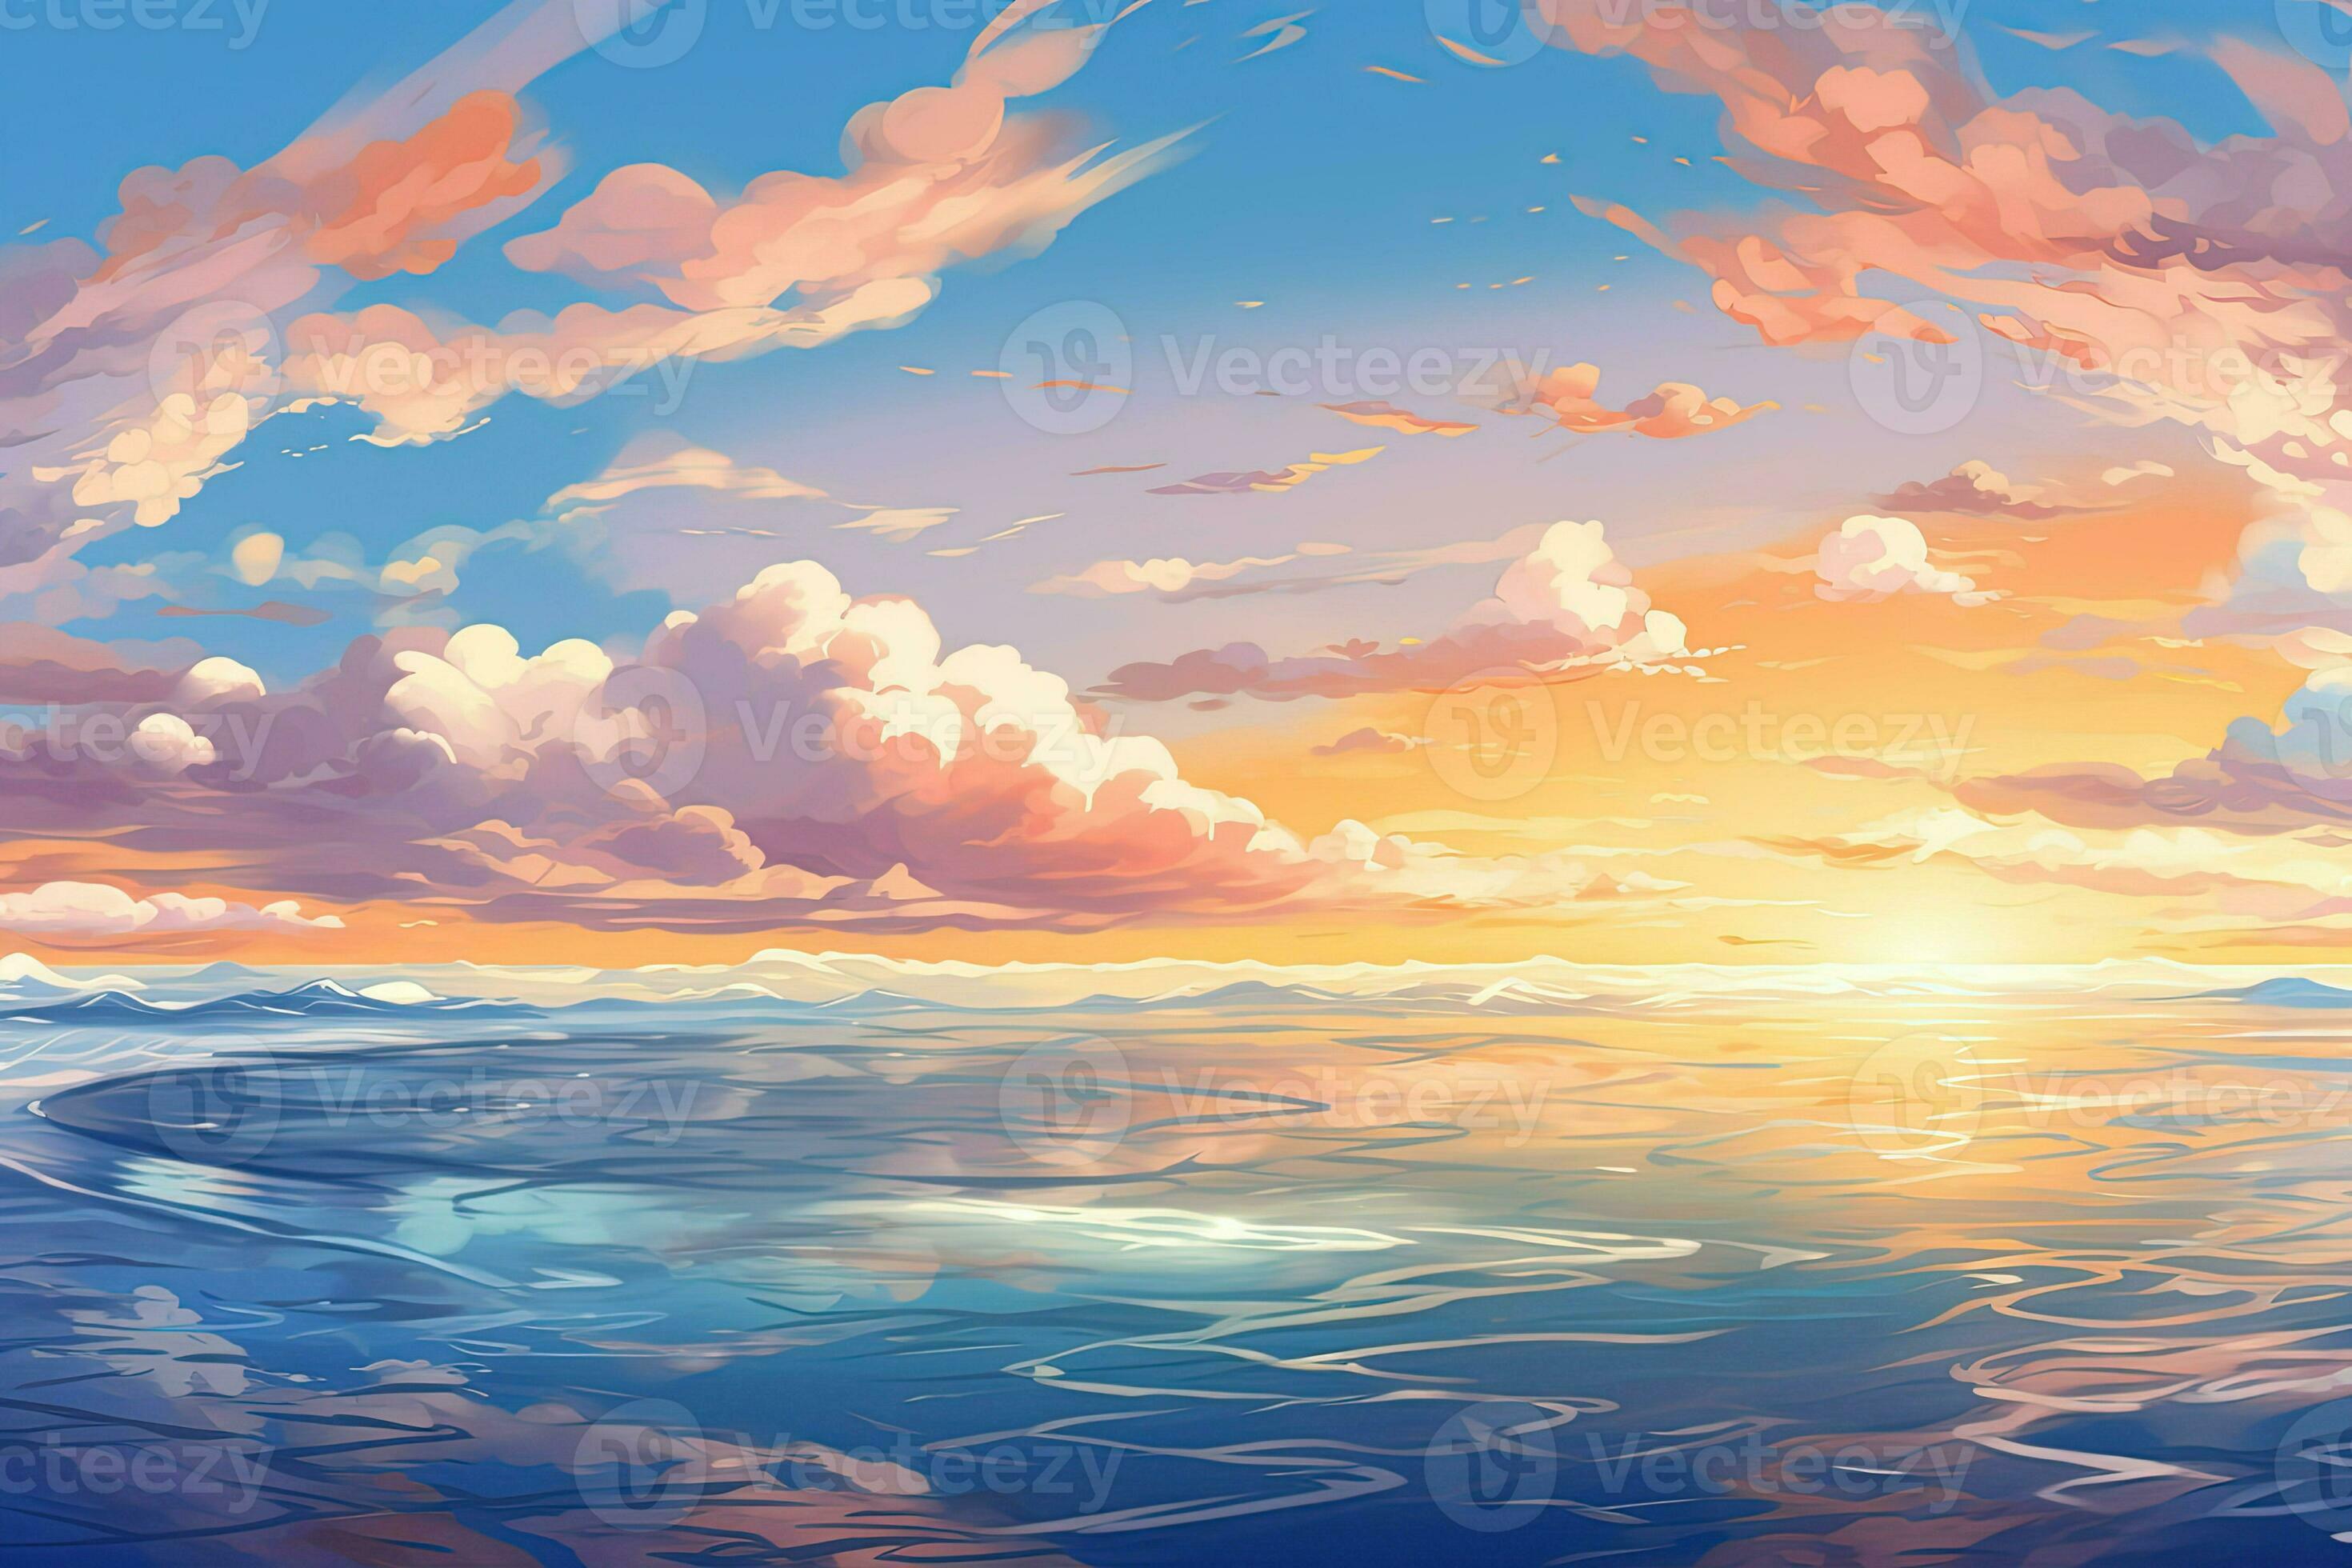 Anime style wallpaper with ocean and sandy beach on Craiyon-demhanvico.com.vn